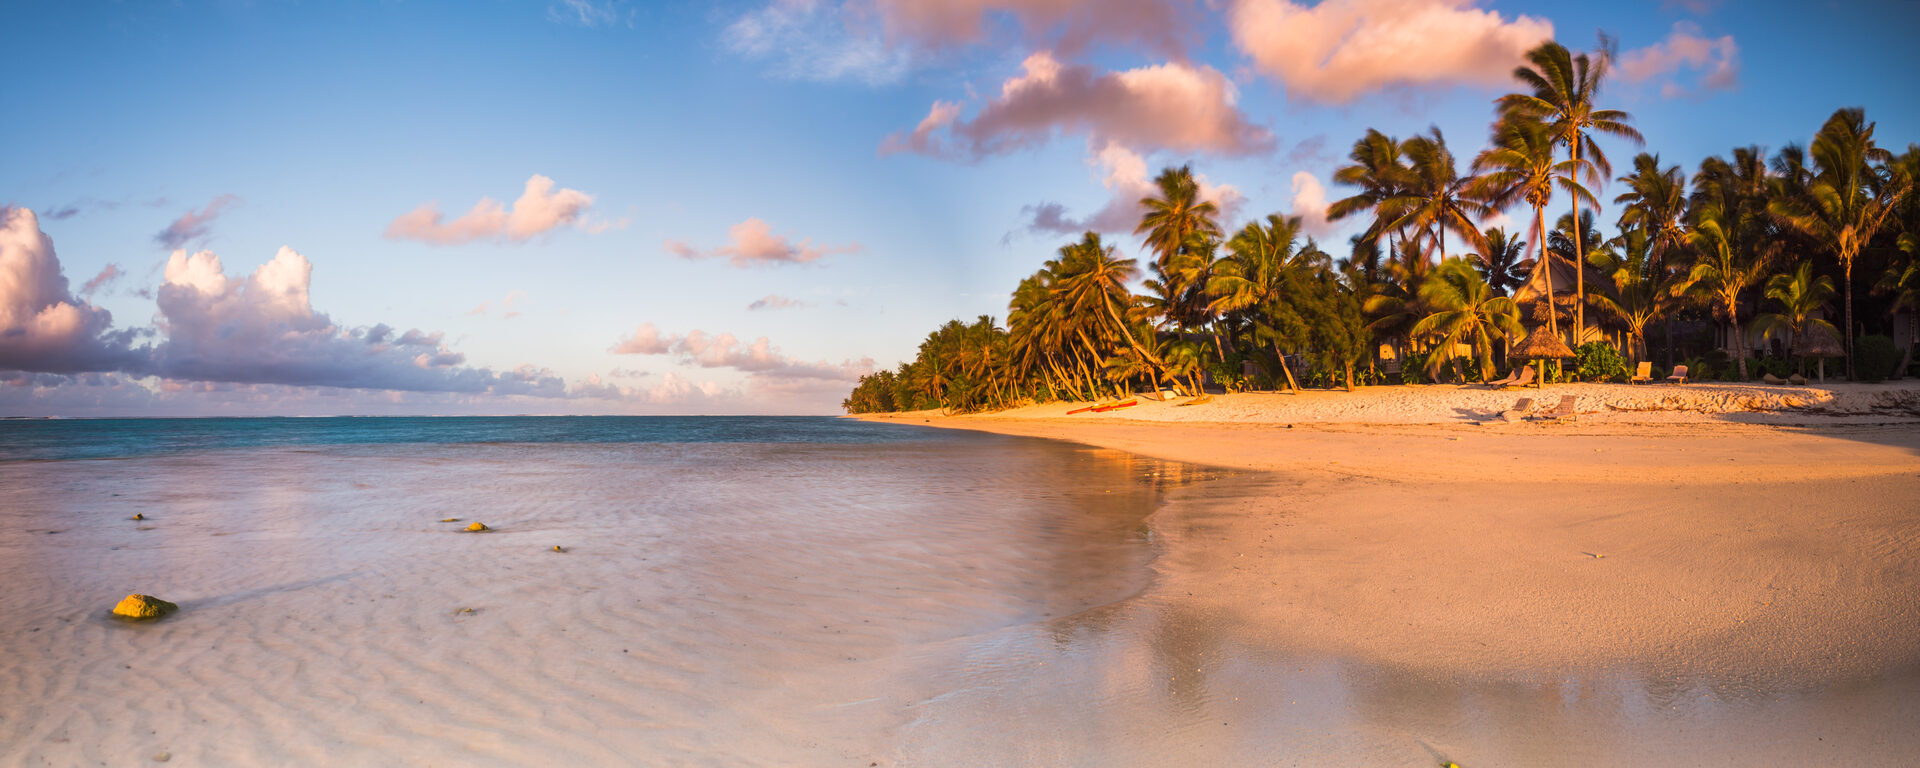 Cook Islands Landscape Travel Photography Tropical beach with palm trees at sunrise Rarotonga Cook Islands